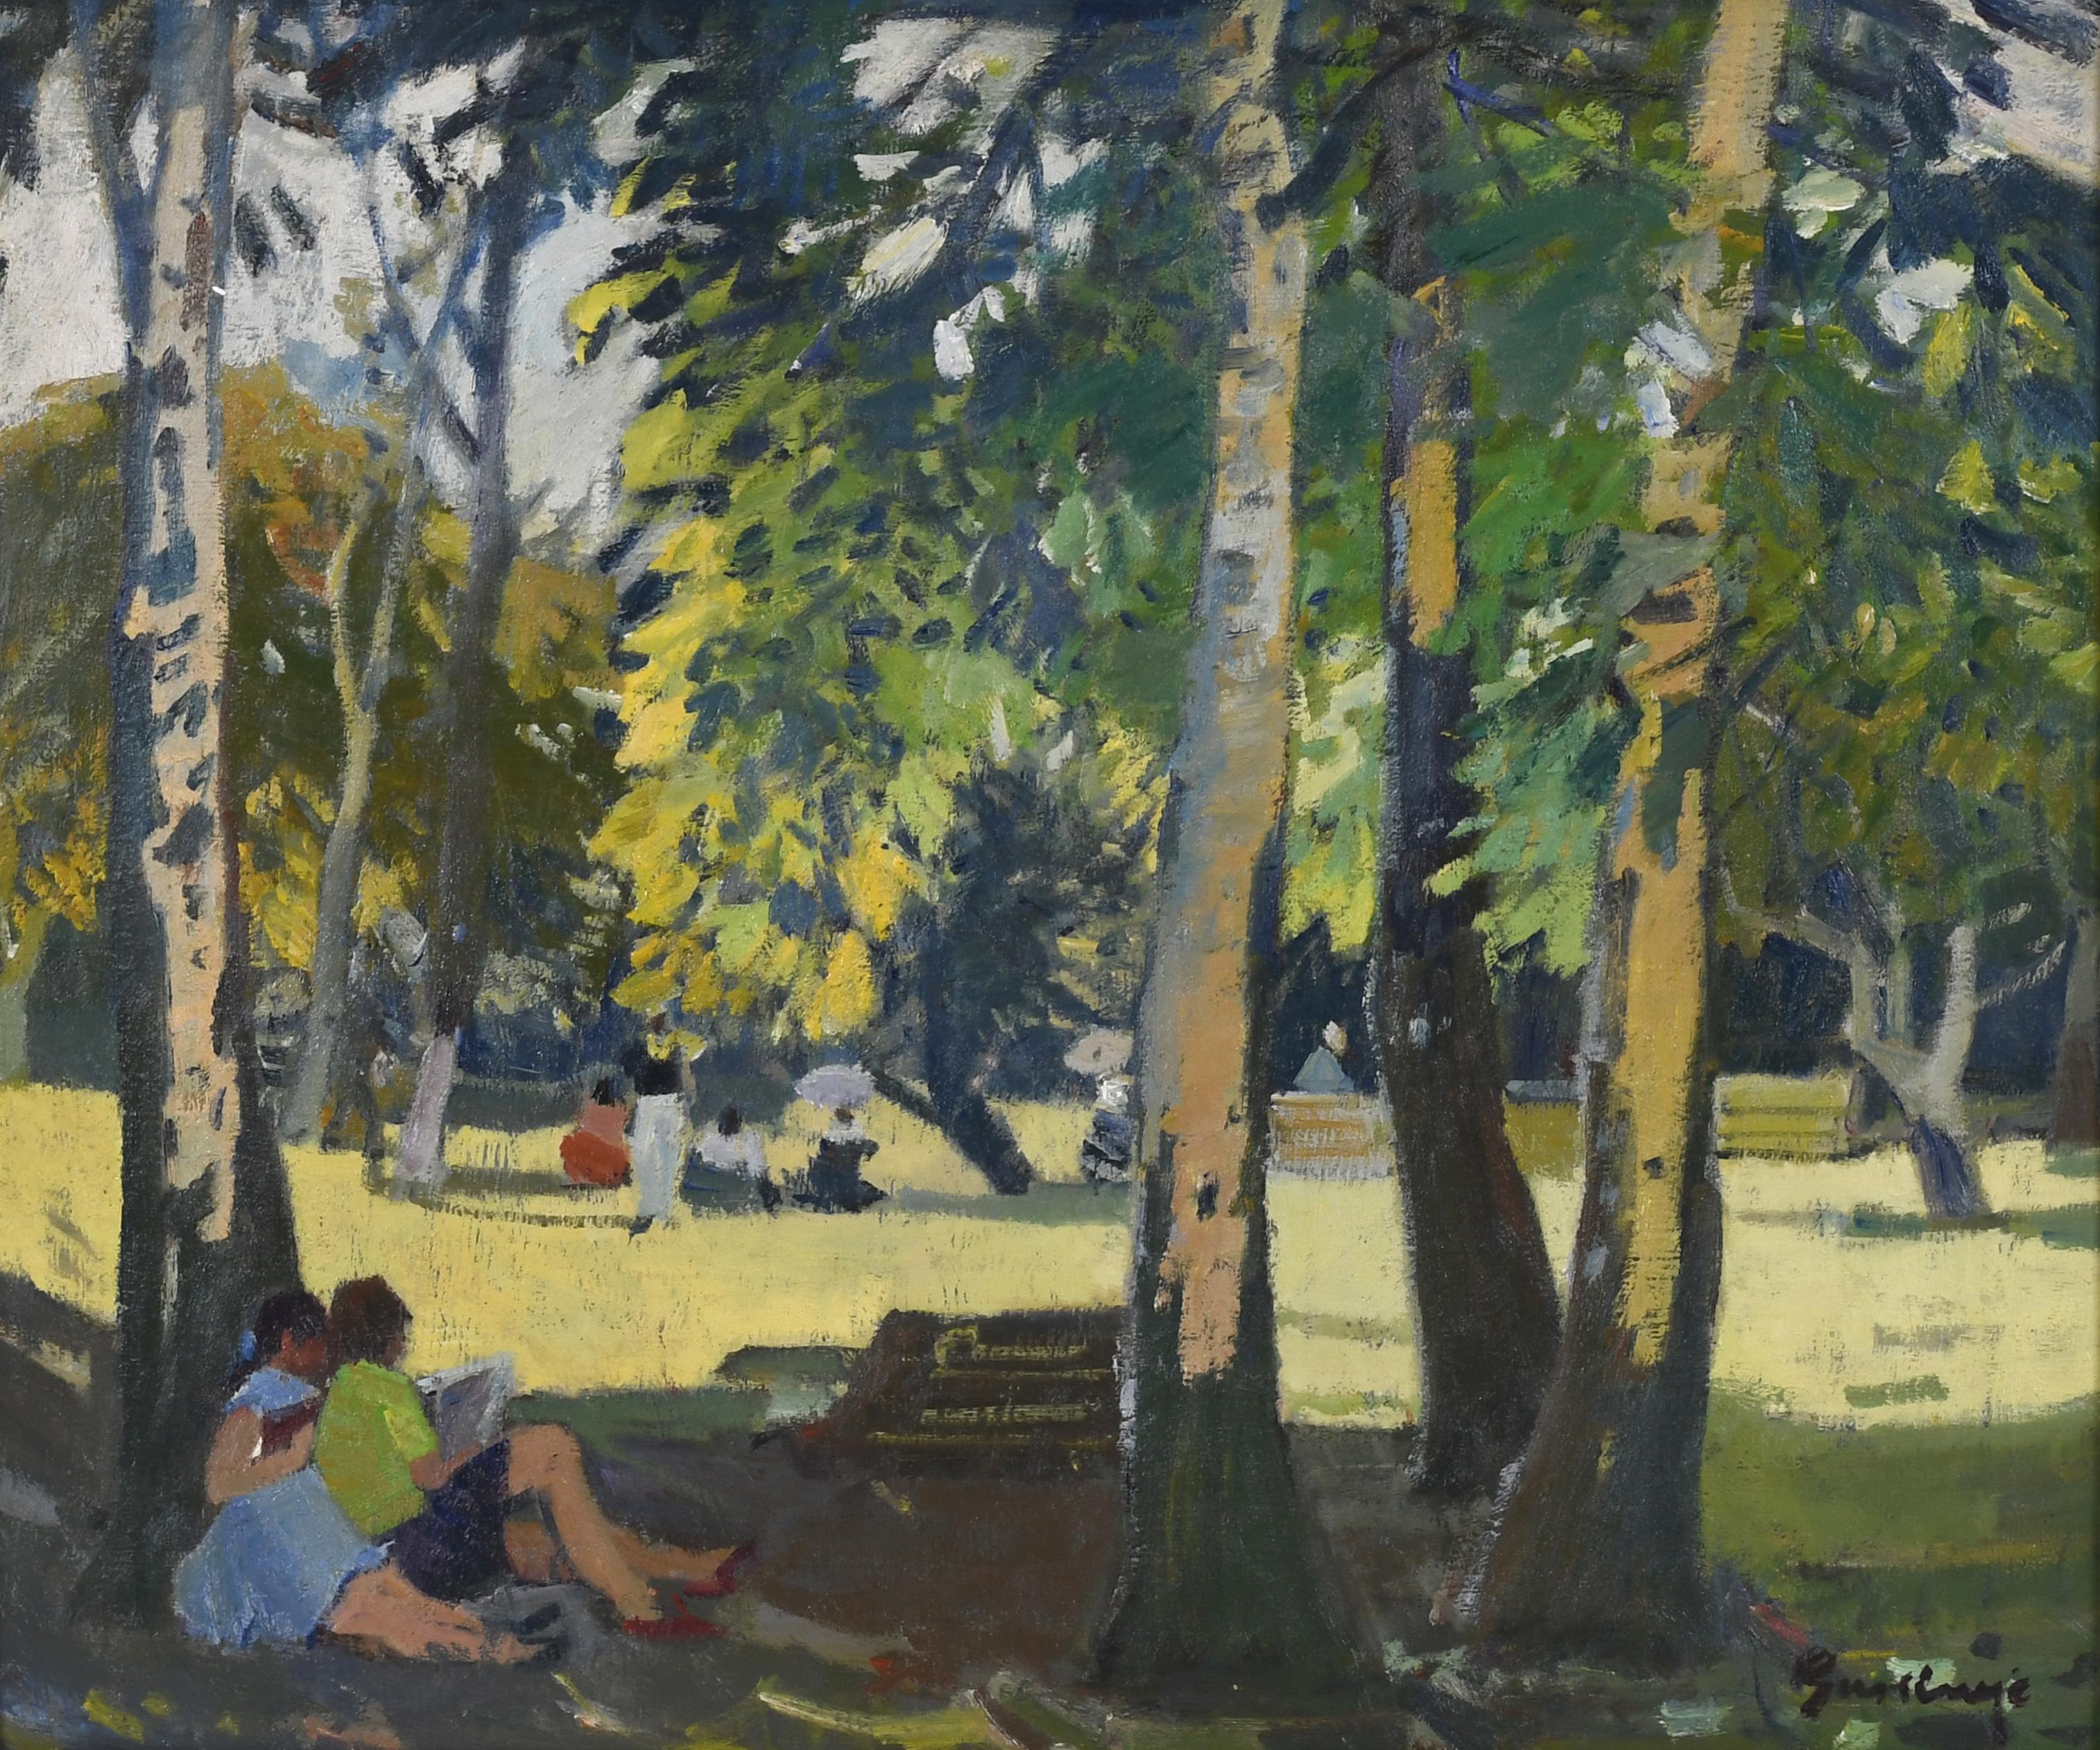 PERE GUSSINYÉ GIRONELLA (1898-1980). "READING IN THE PARK".